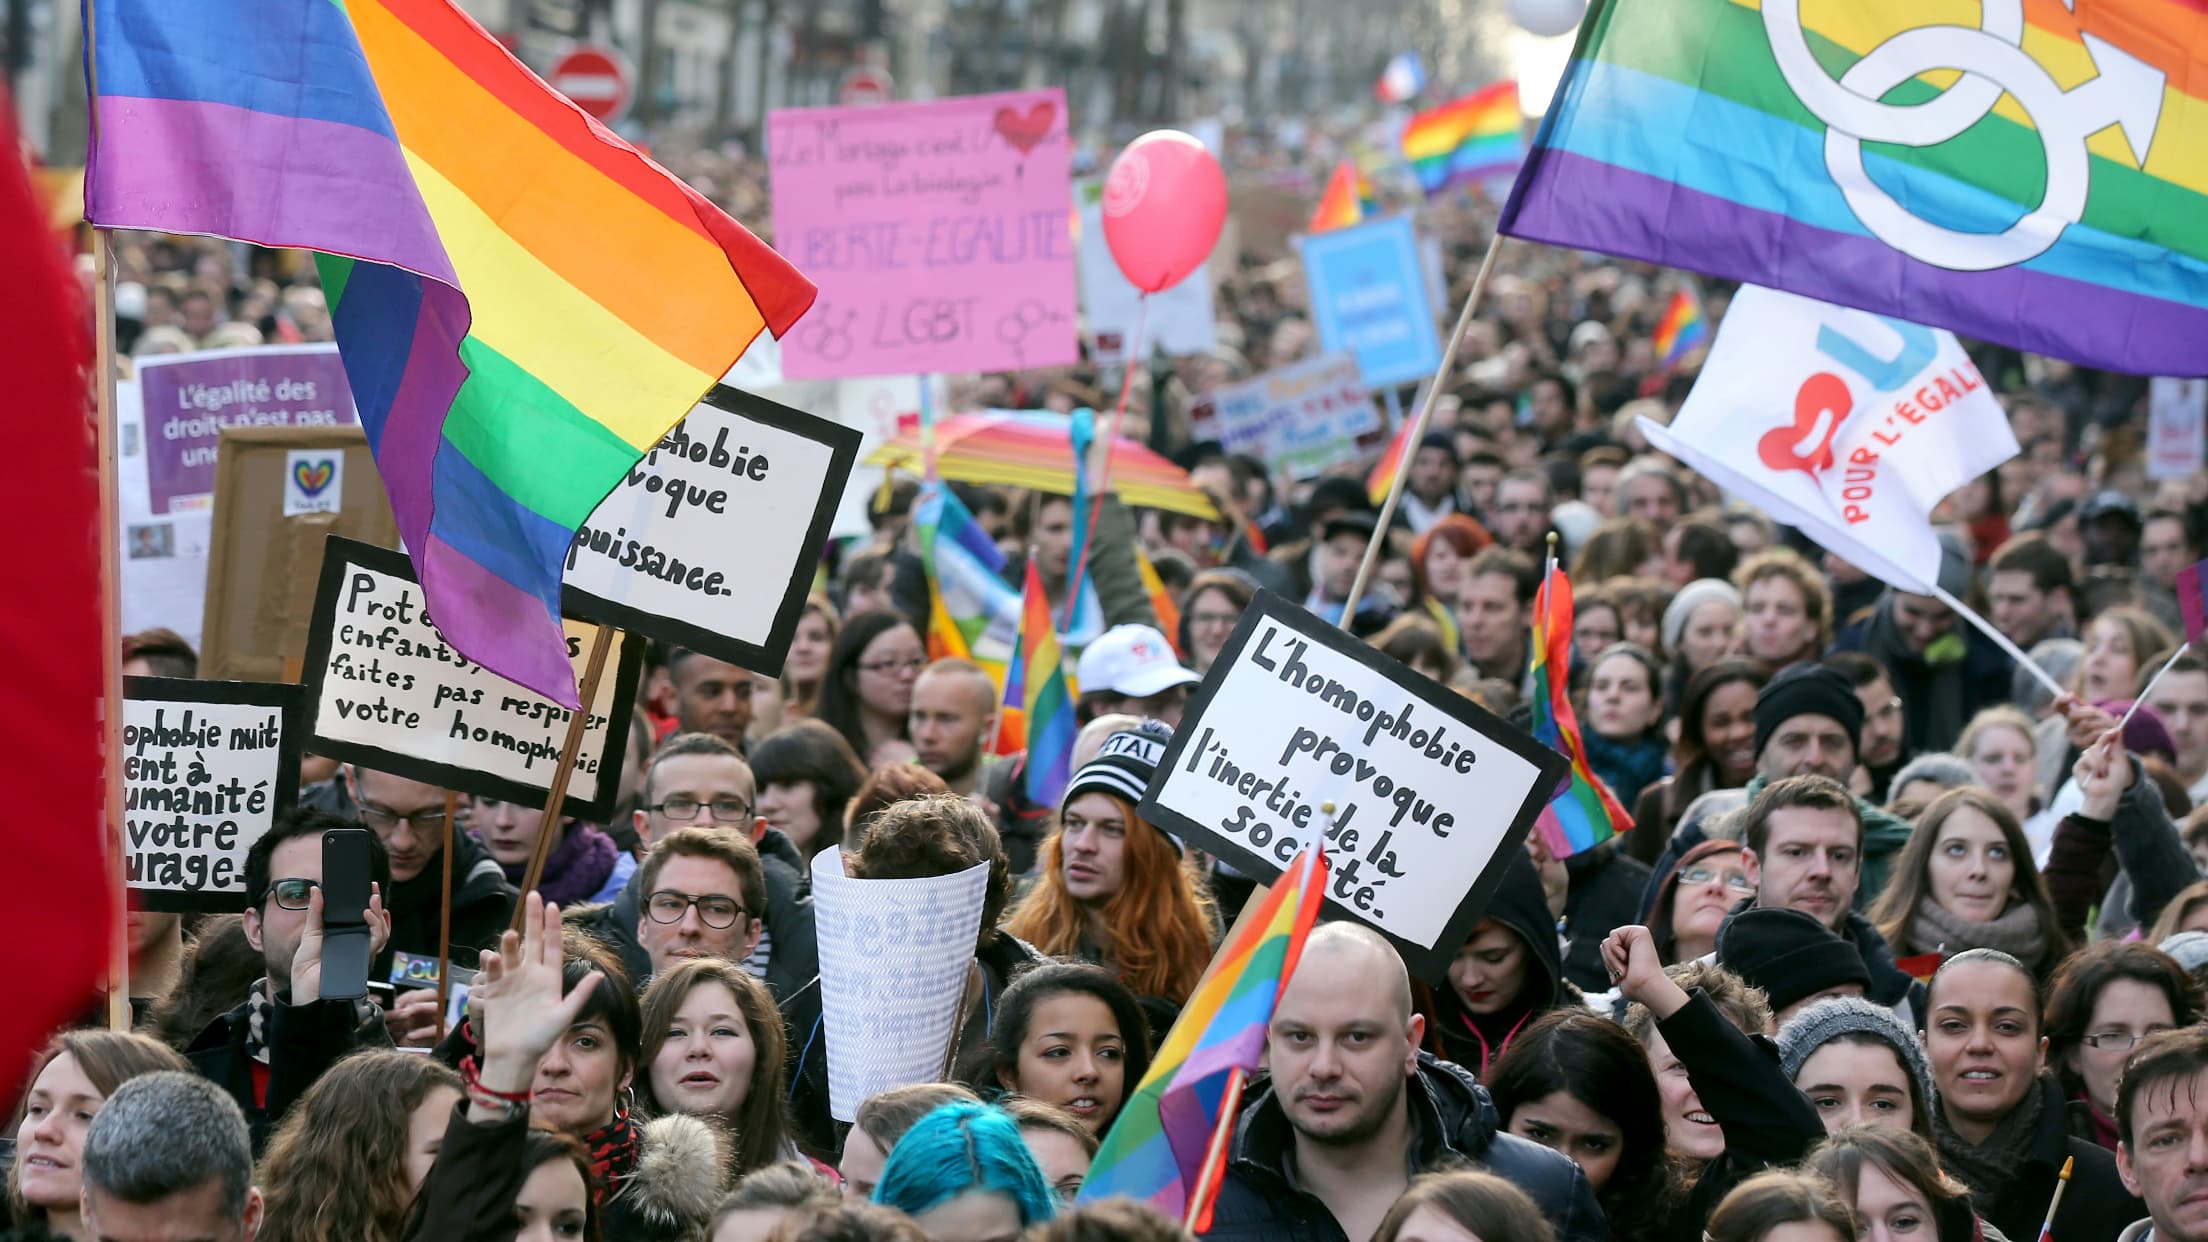 Thousands join paris rally against gay marriage law